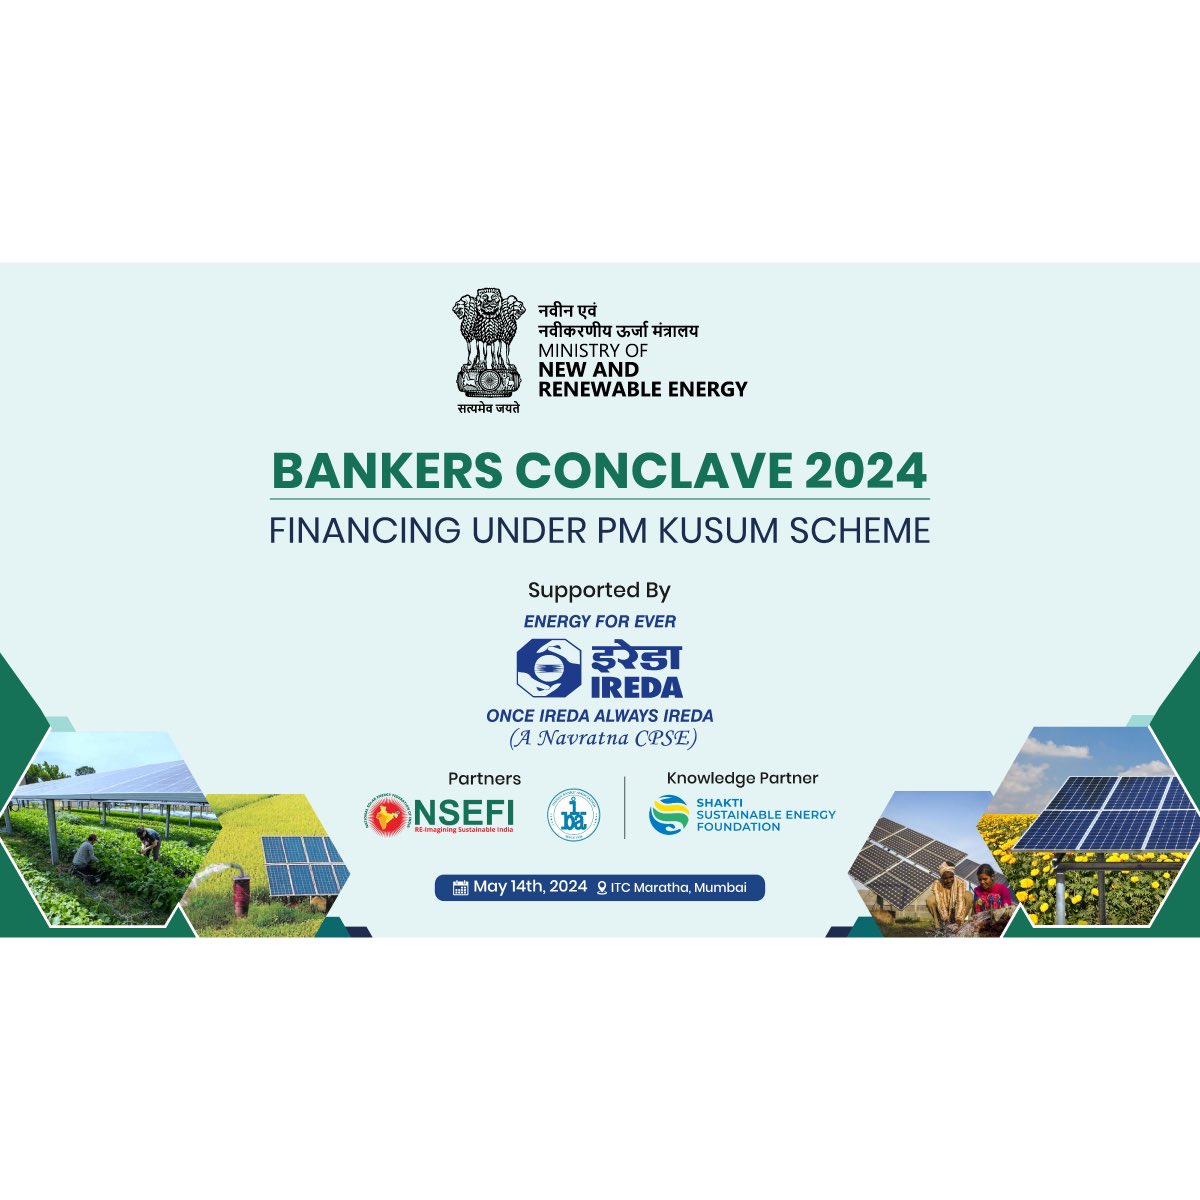 @mnreindia is organizing - BANKERS CONCLAVE 2024 - Financing Under PM Kusum Scheme. The Conclave is Supported by @IREDALtd & in partnership with @NSEFI_official, along with the knowledge partner @ShaktiFdn. 🗓️14.5.2024 📍 ITC Maratha, Mumbai ⏰ 10:00 am @oiseaulibre3 @DDjagdale